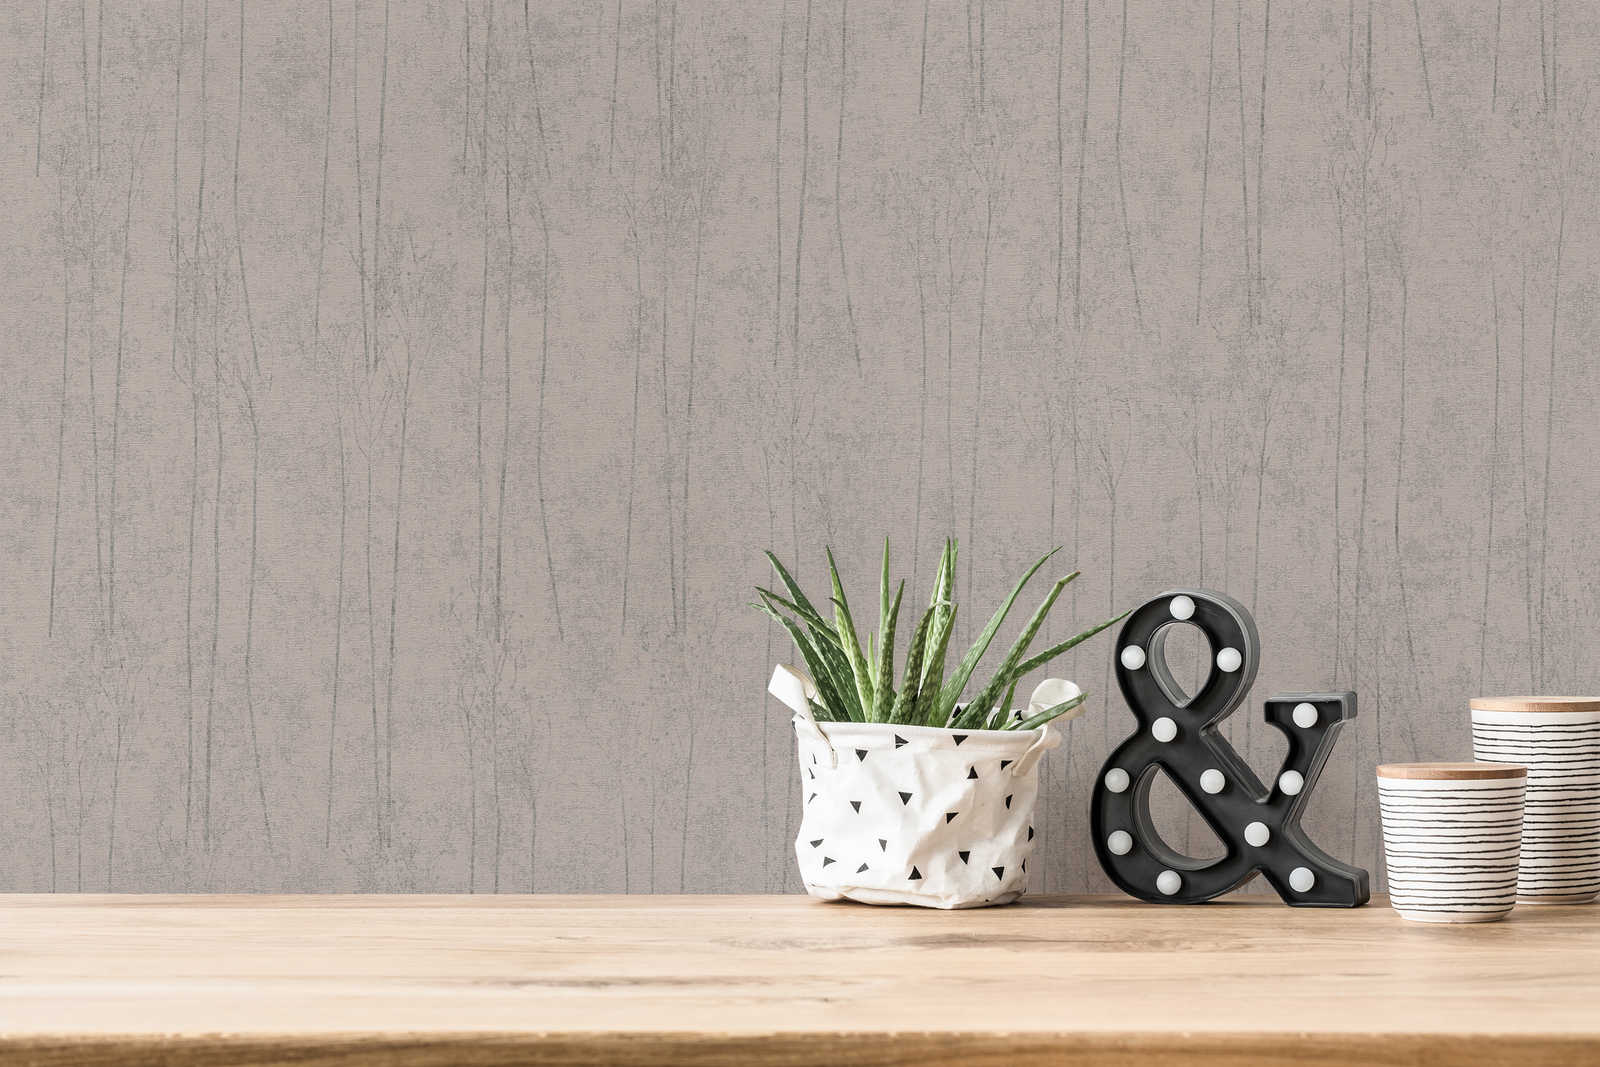             Grey non-woven wallpaper with nature design in Scandi style
        